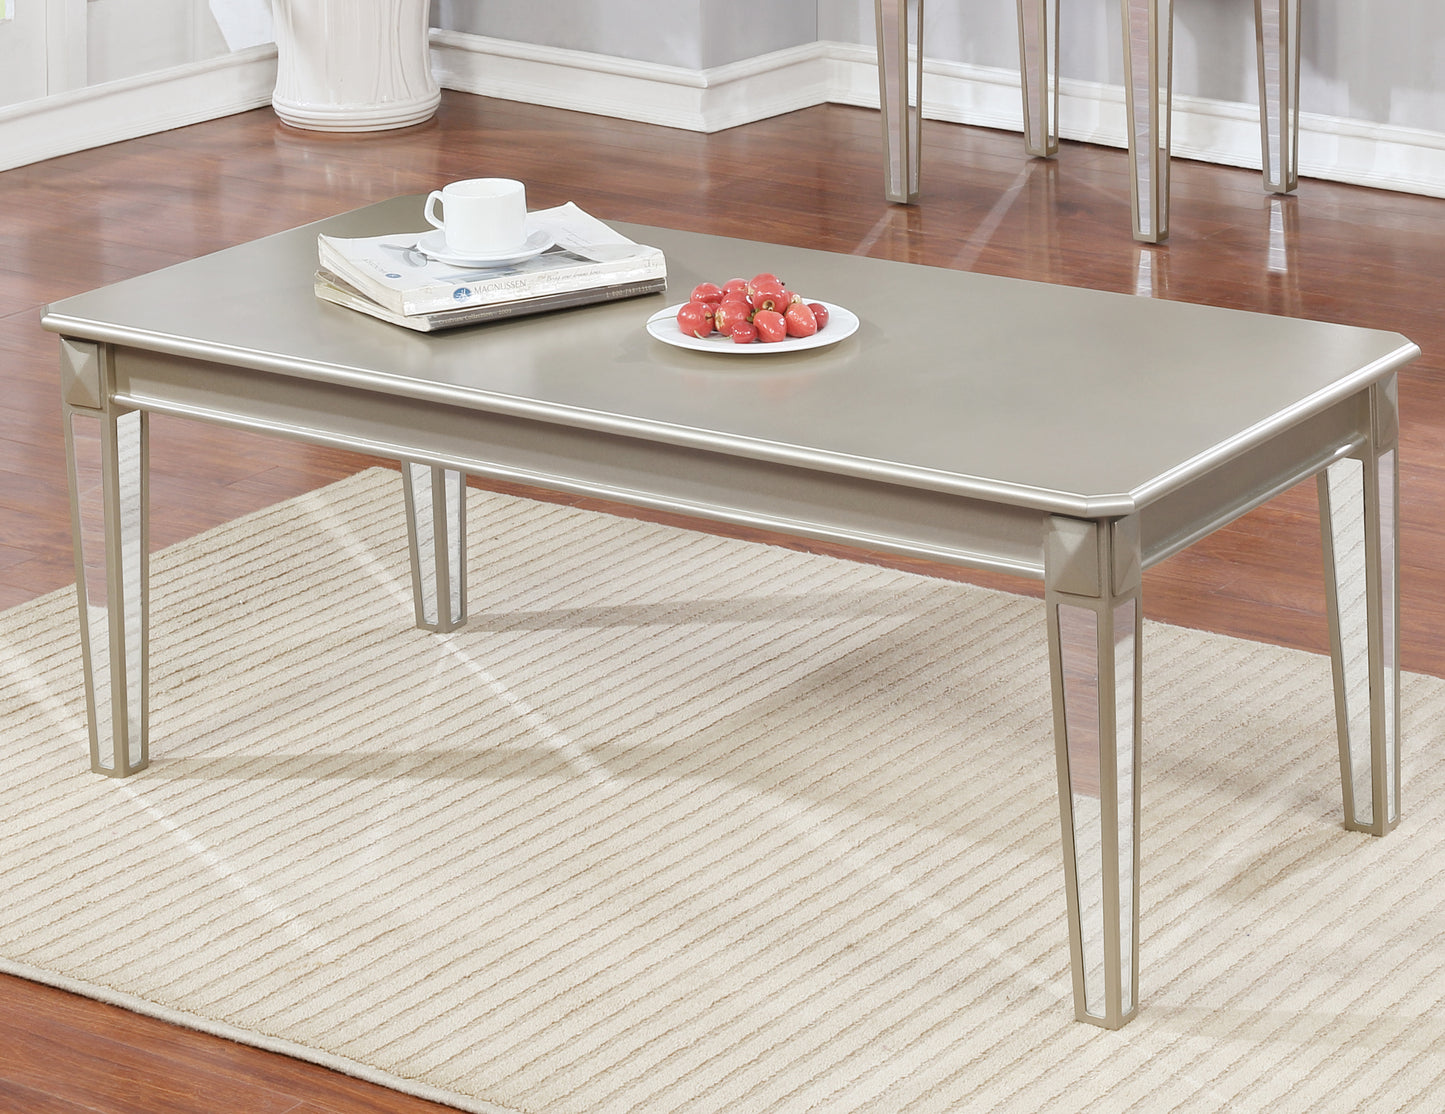 Barent Contemporary Wood Coffee Table with Mirrored Legs, Champagne